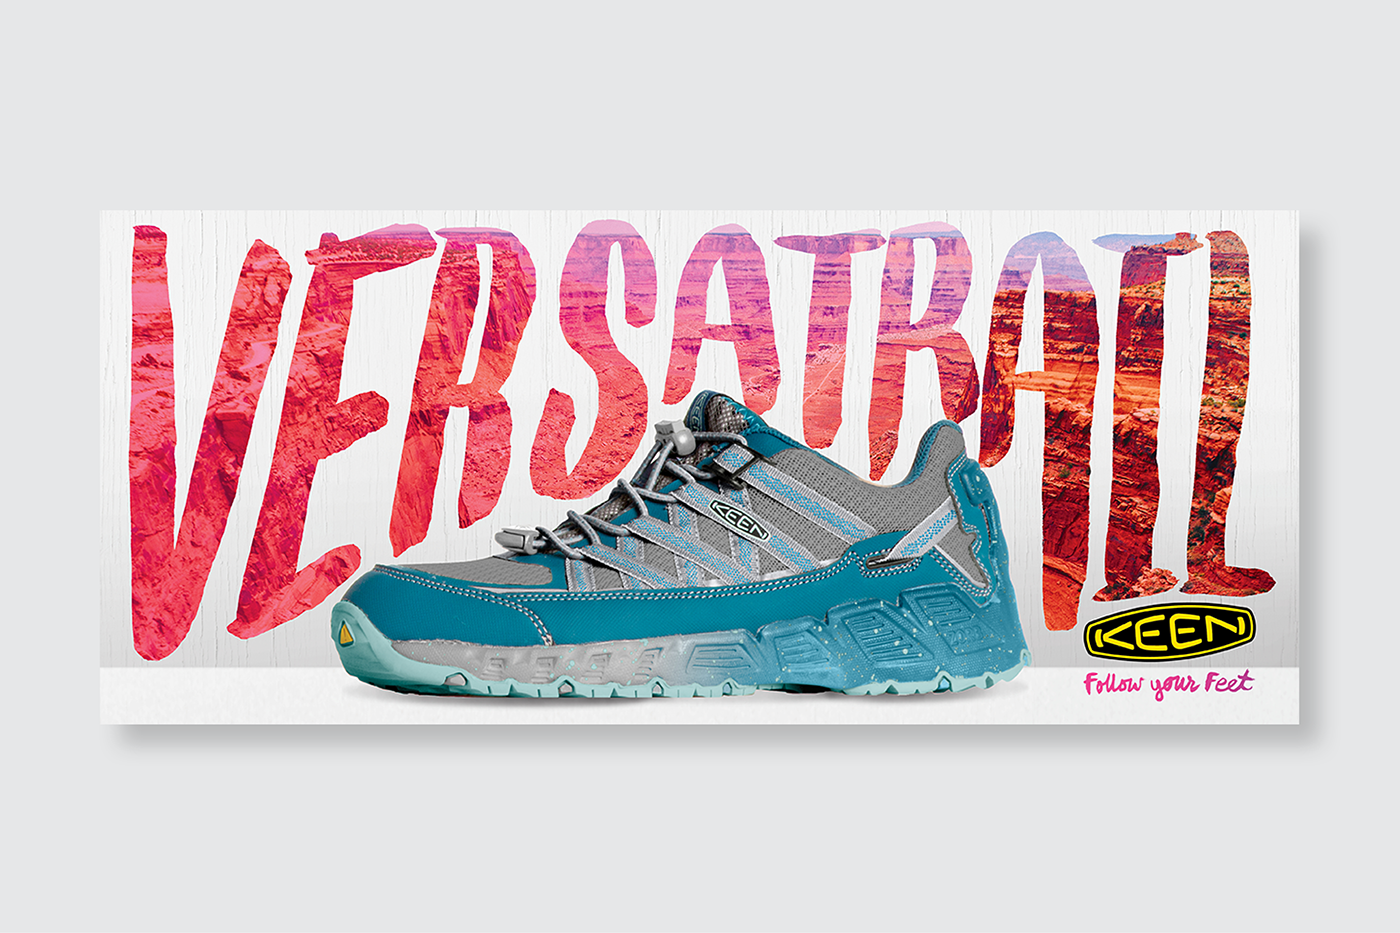 footwear Advertising  lettering typography   HAND LETTERING Digital Art  Fashion  Retail Ecommerce